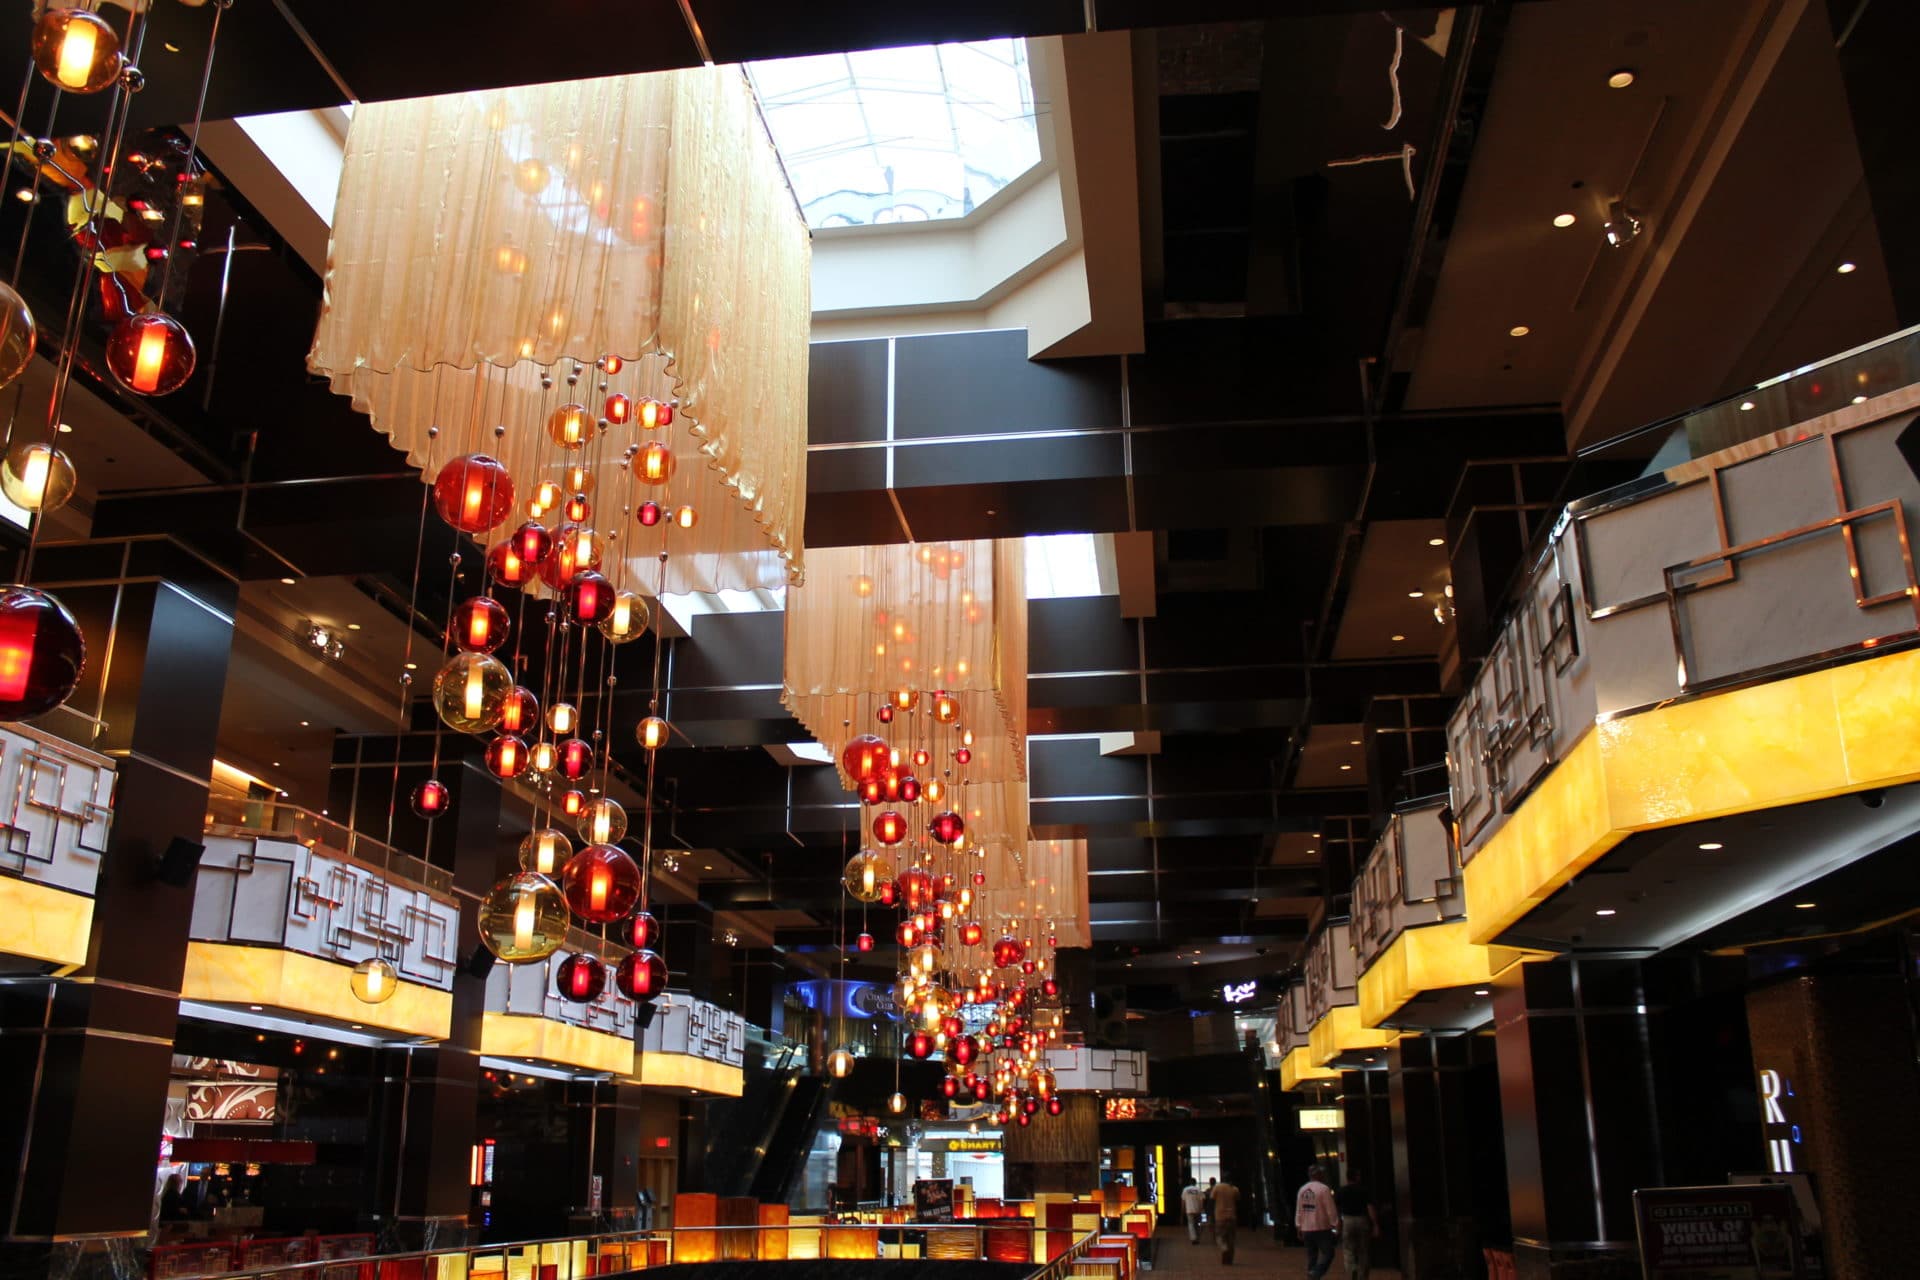 View of Golden Nugget's Atrium from the Check-in Desk.